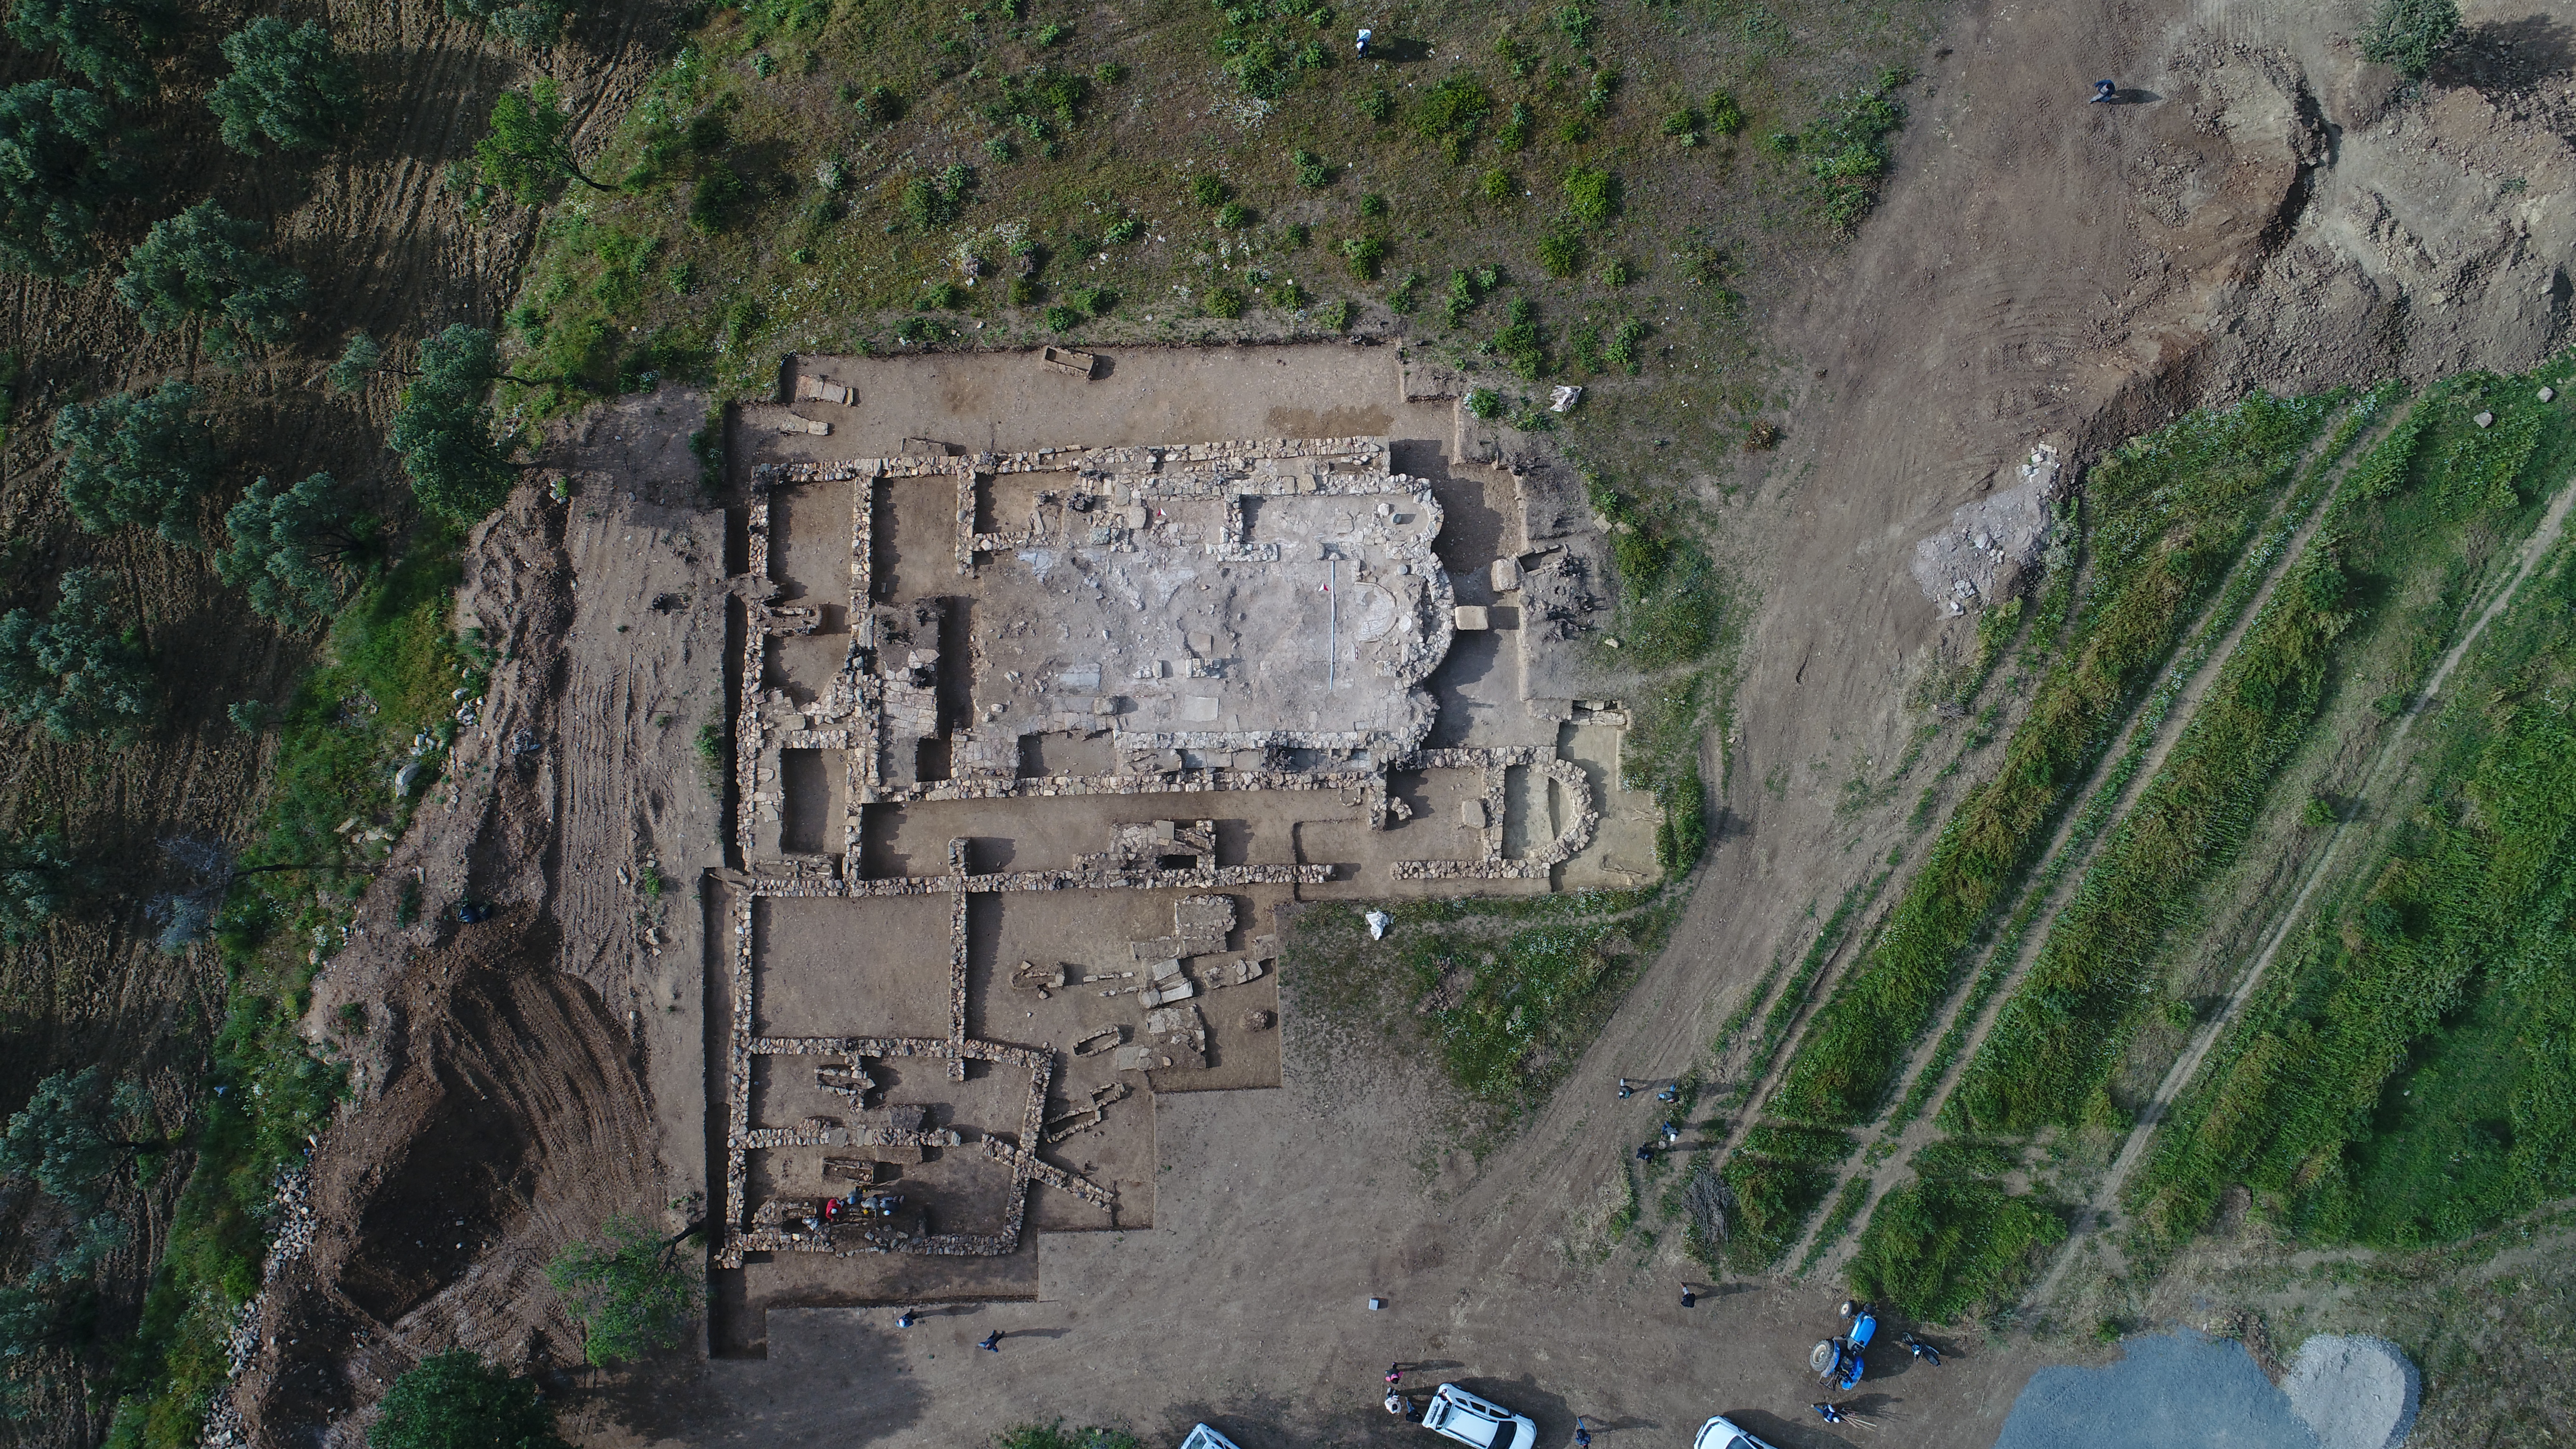 Roman-era structures unearthed in Balikesir dam site excavations